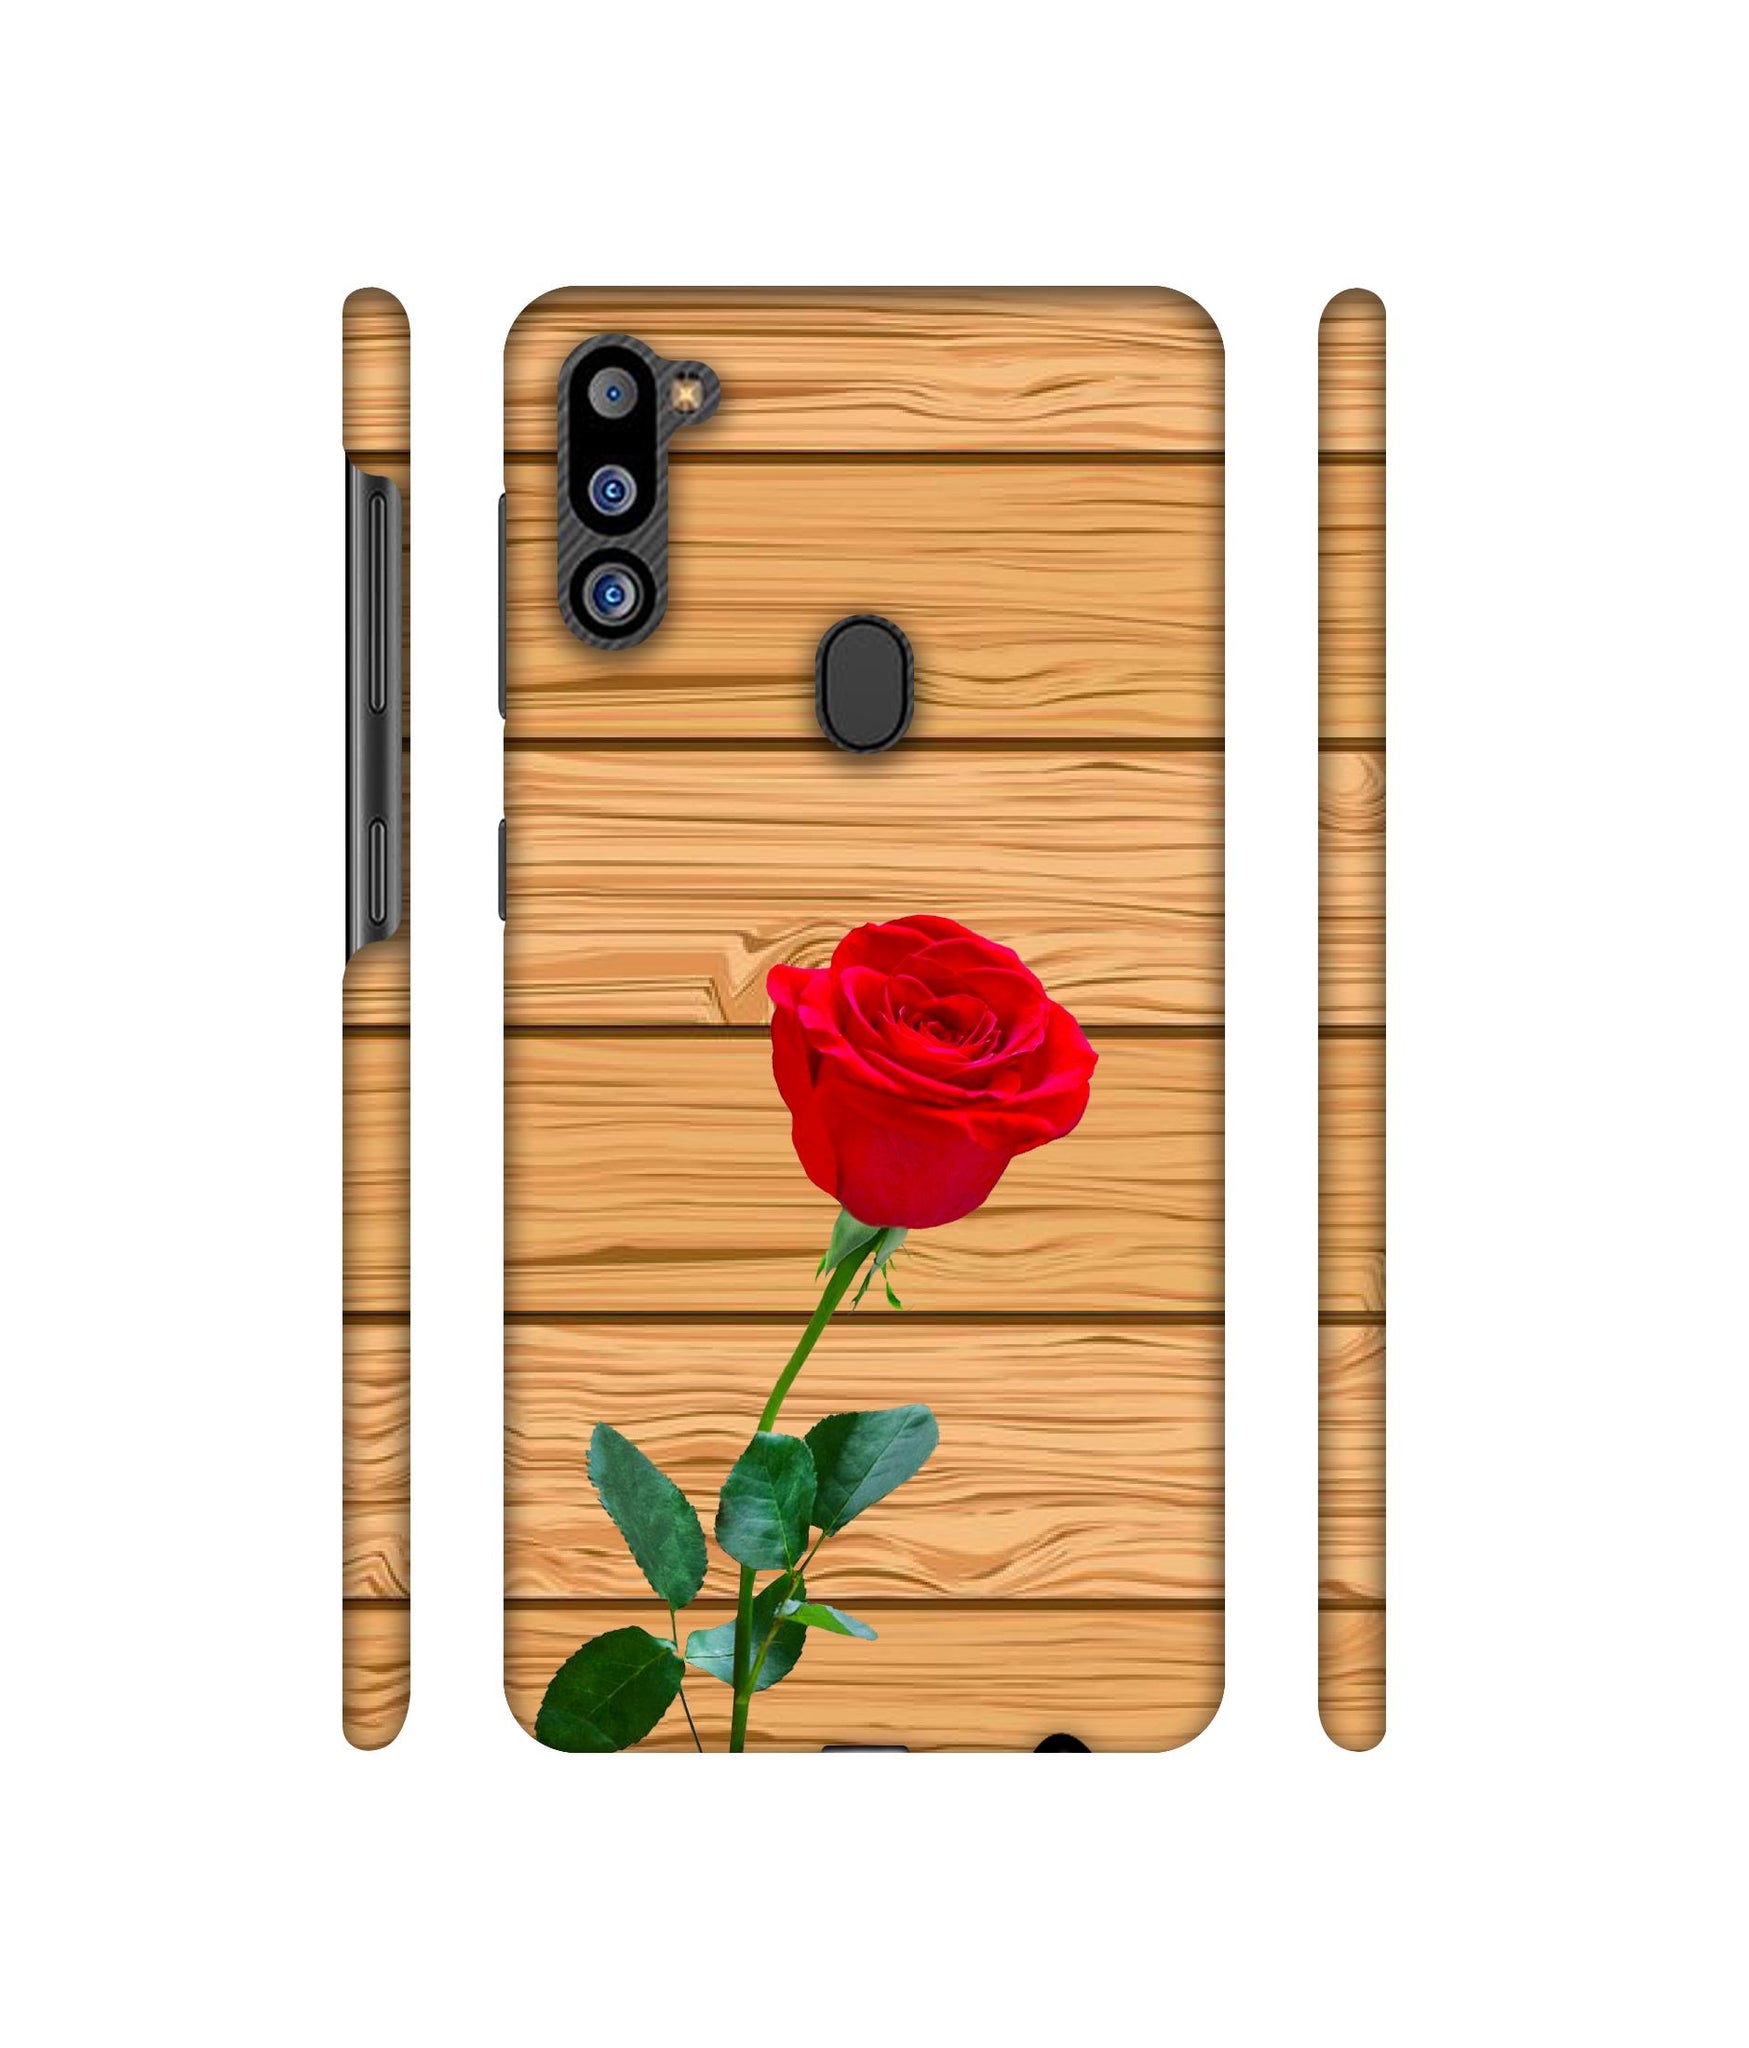 Rose With Wooden Texture Designer Hard Back Cover for Samsung Galaxy M21 2021 Edition